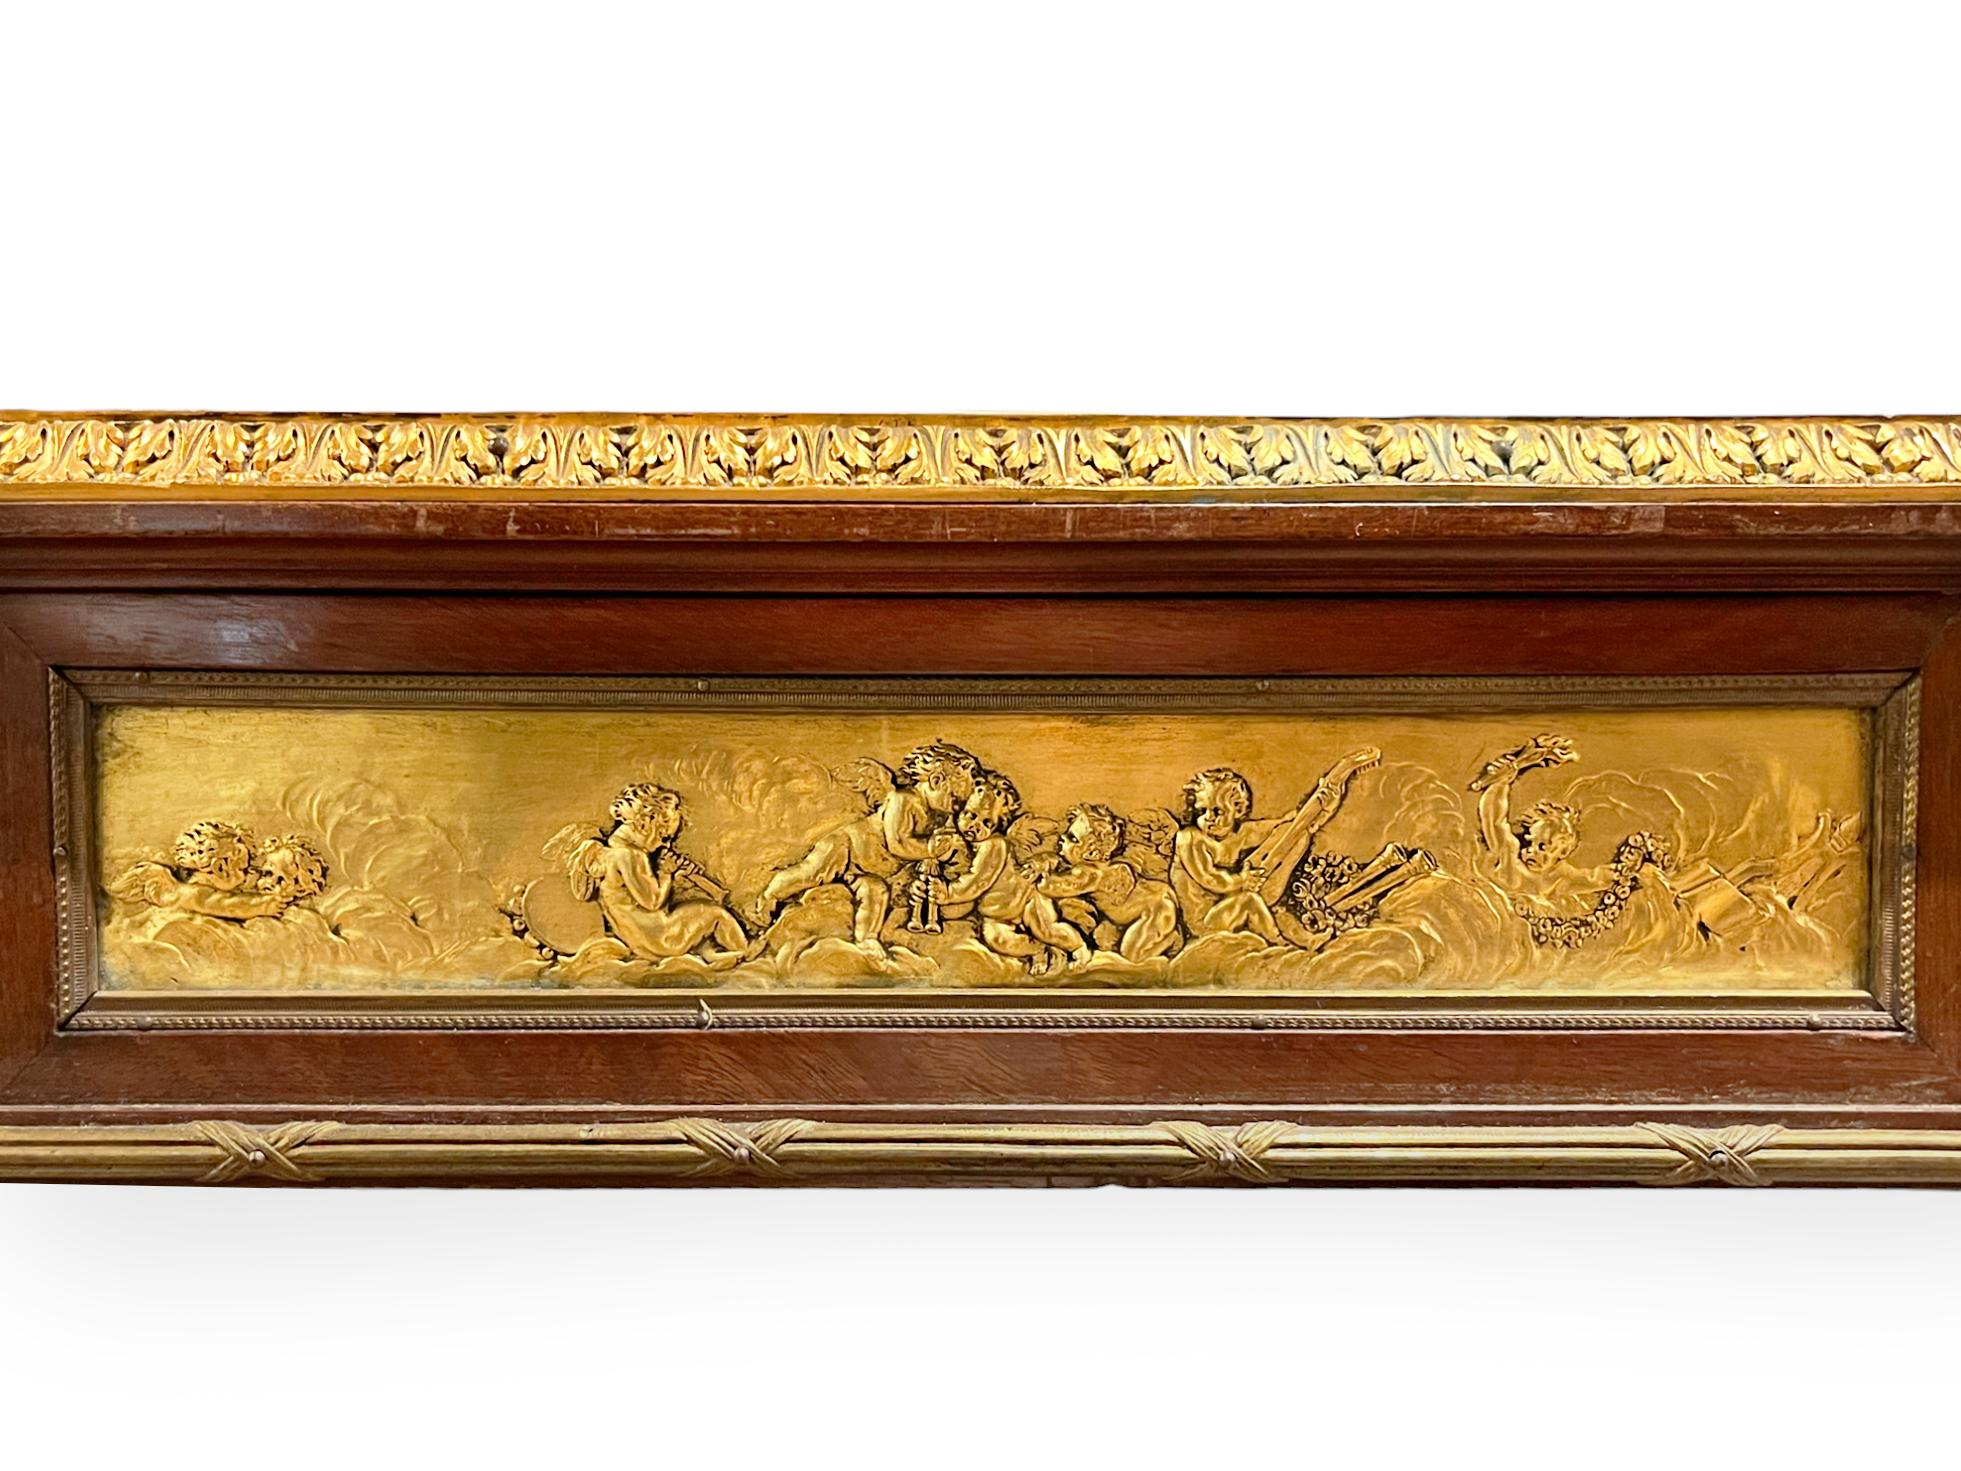 Contains  gilt ornaments and a frieze of putti in heaven on either side. Topped with blind-tooled leather, an inset writing surface. Contains one large drawer that runs the width of the table. 

Maker: Alexandre Chevrié
Origin: French
Date: circa